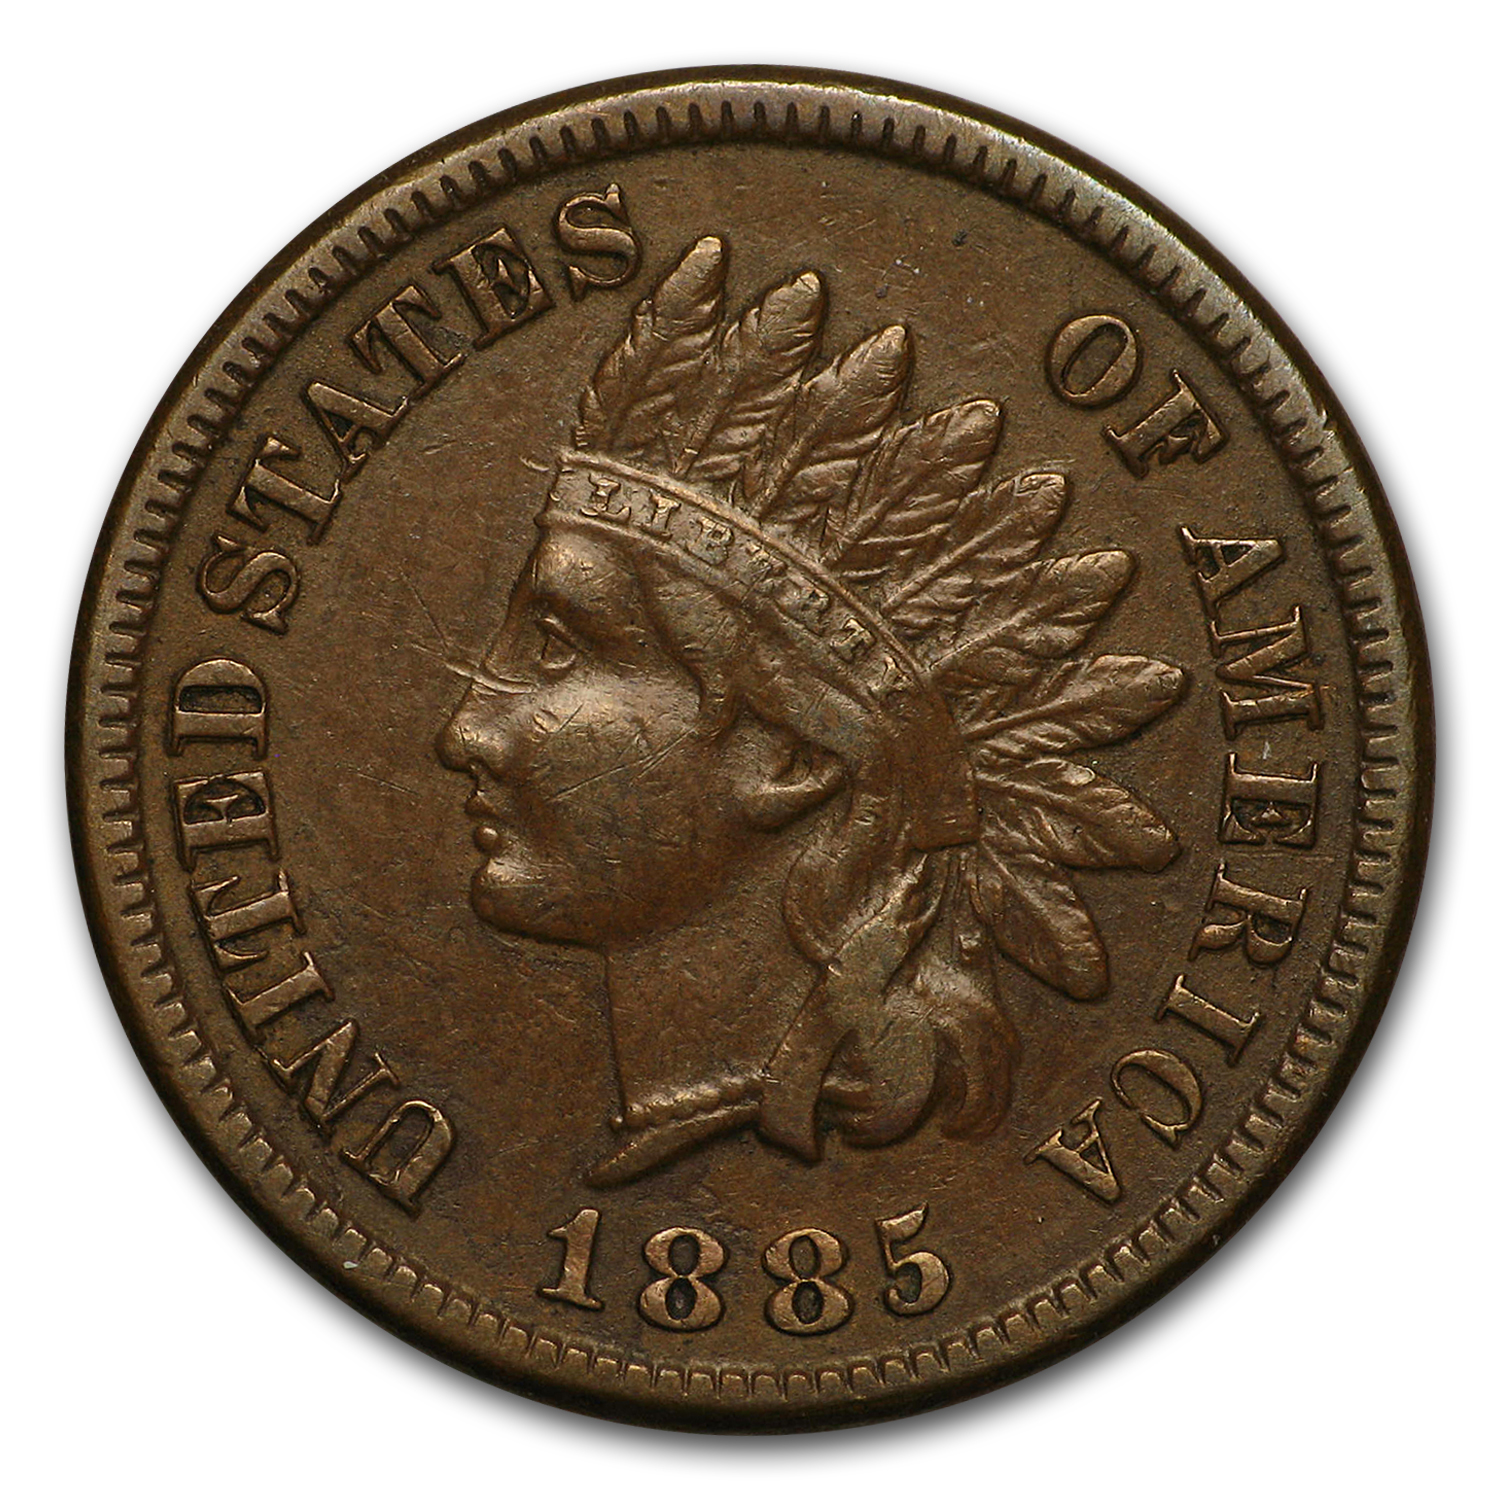 Buy 1885 Indian Head Cent XF